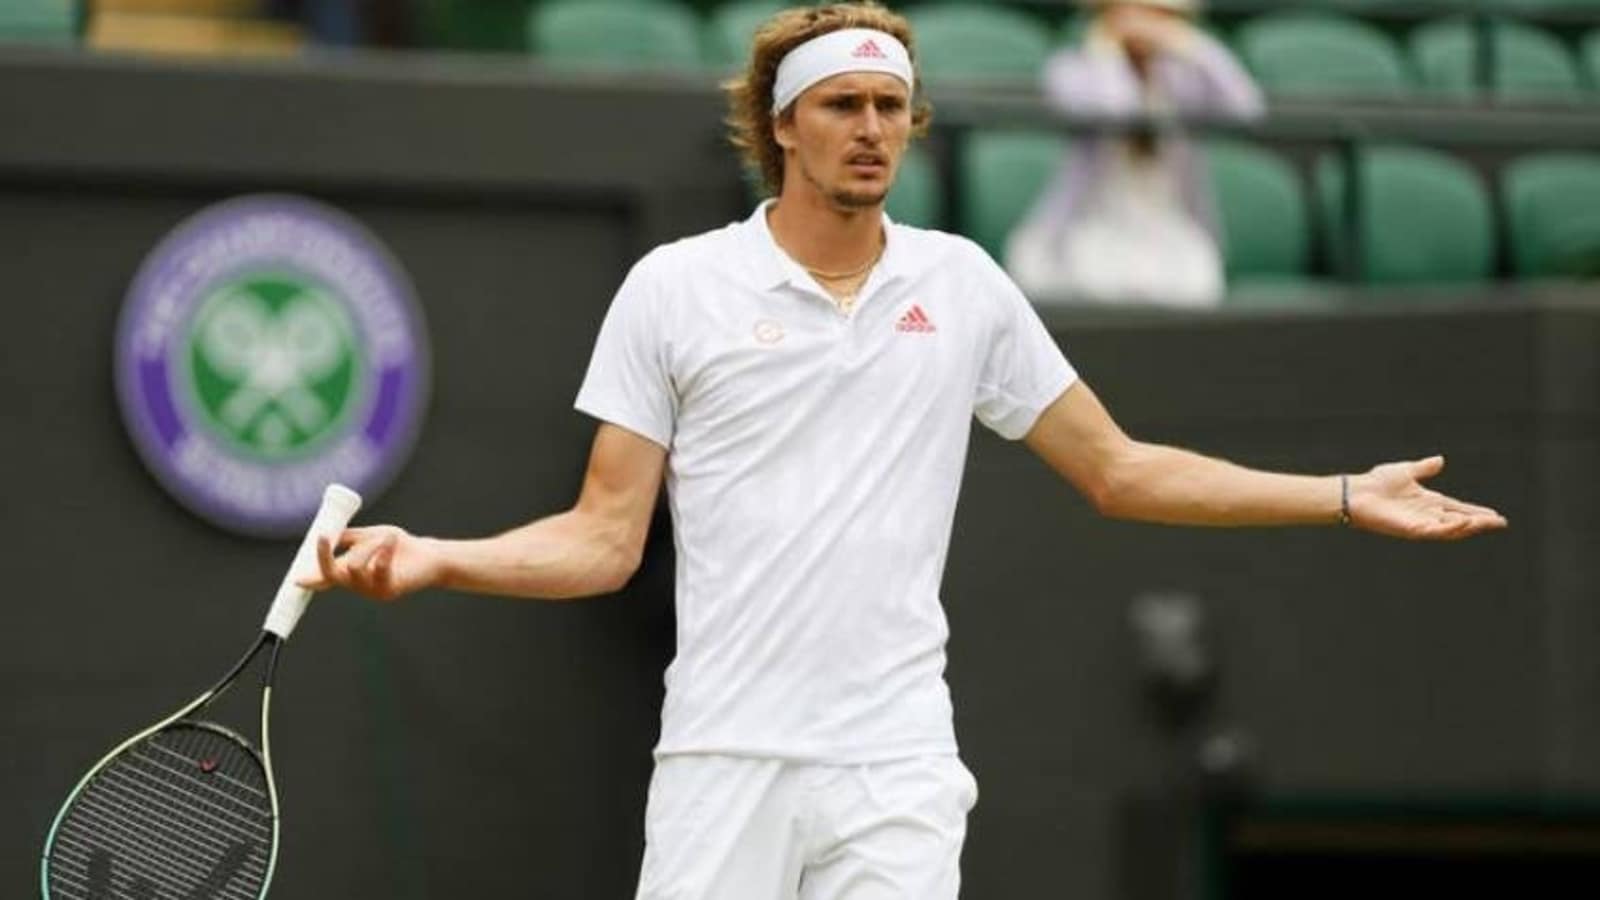 Alexander Zverev's unfortunate Wimbledon withdrawal leads to bizarre first in 49 years